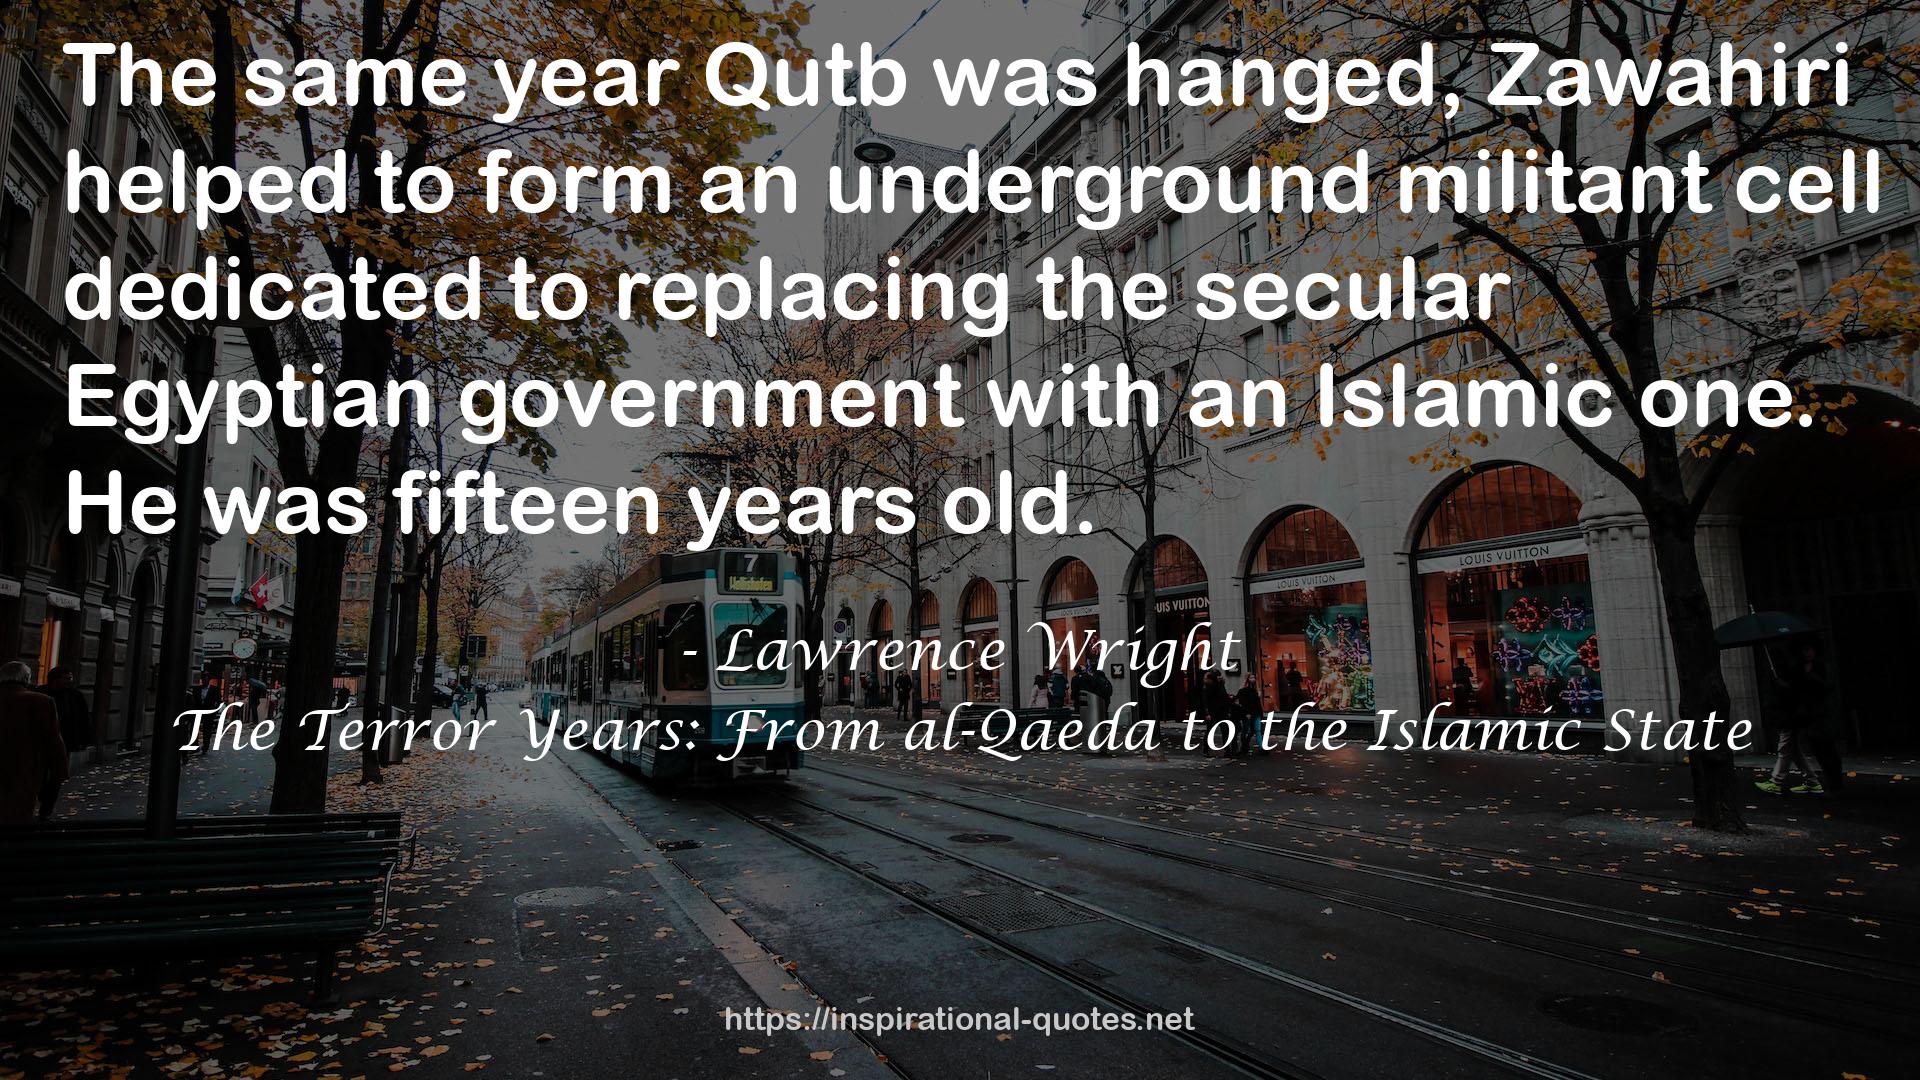 Lawrence Wright QUOTES